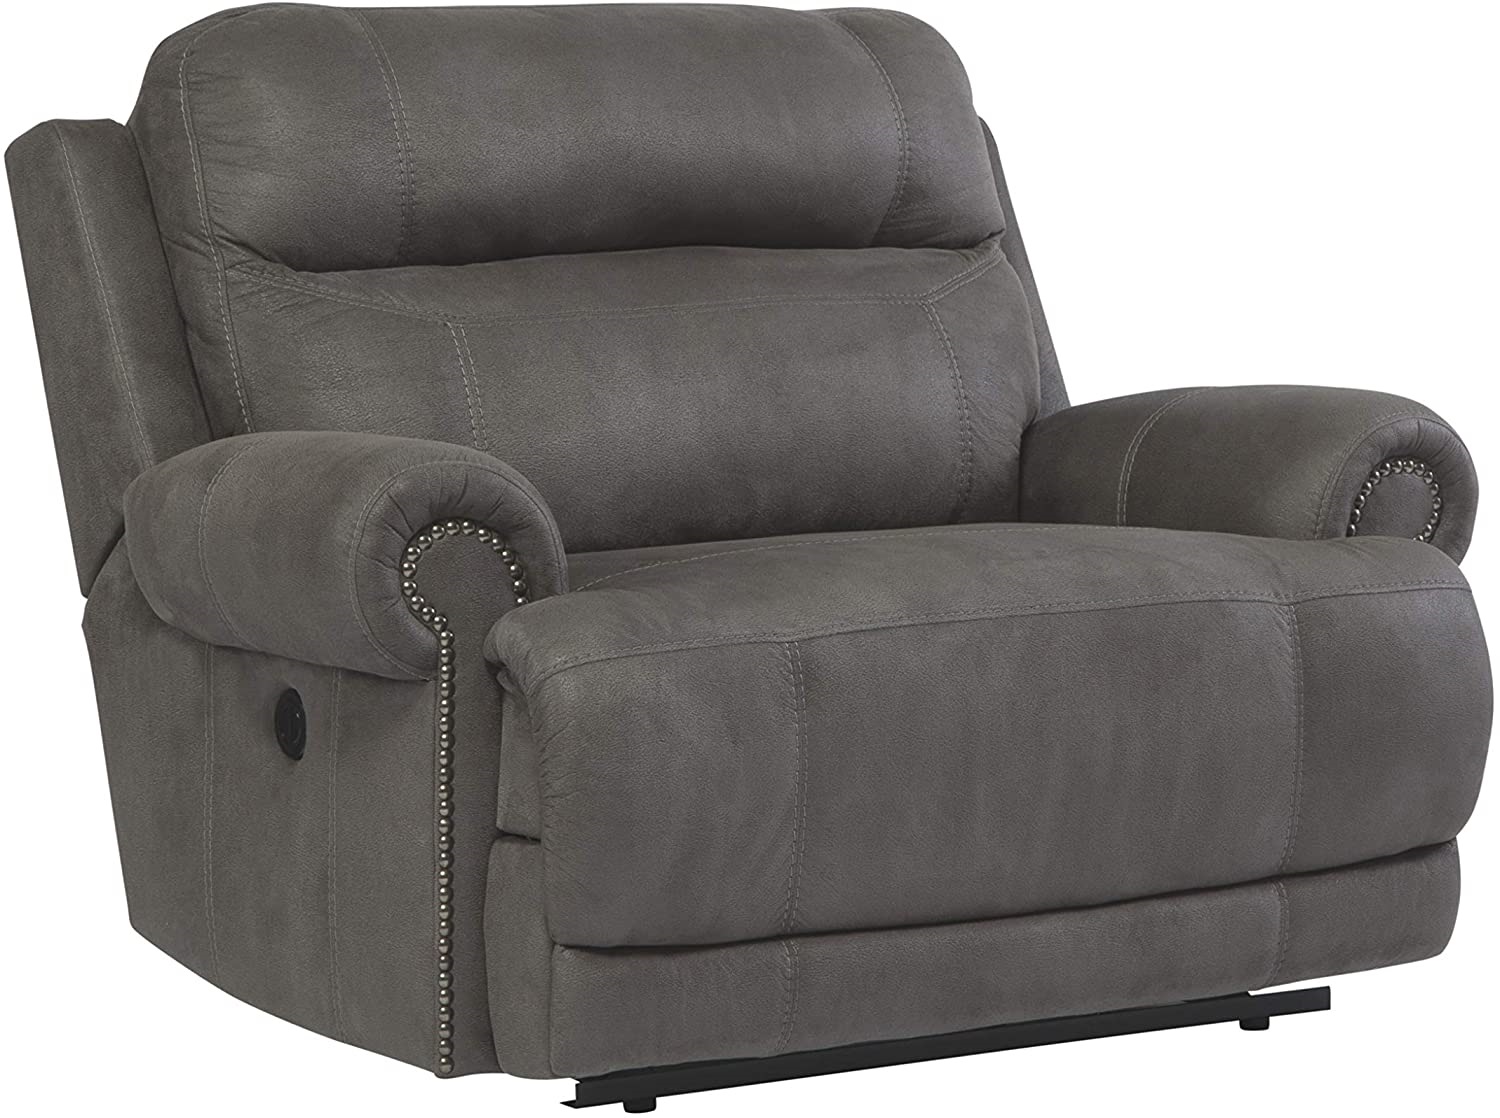 Signature Design by Ashley - Austere Contemporary Upholstered Zero Wall Recliner